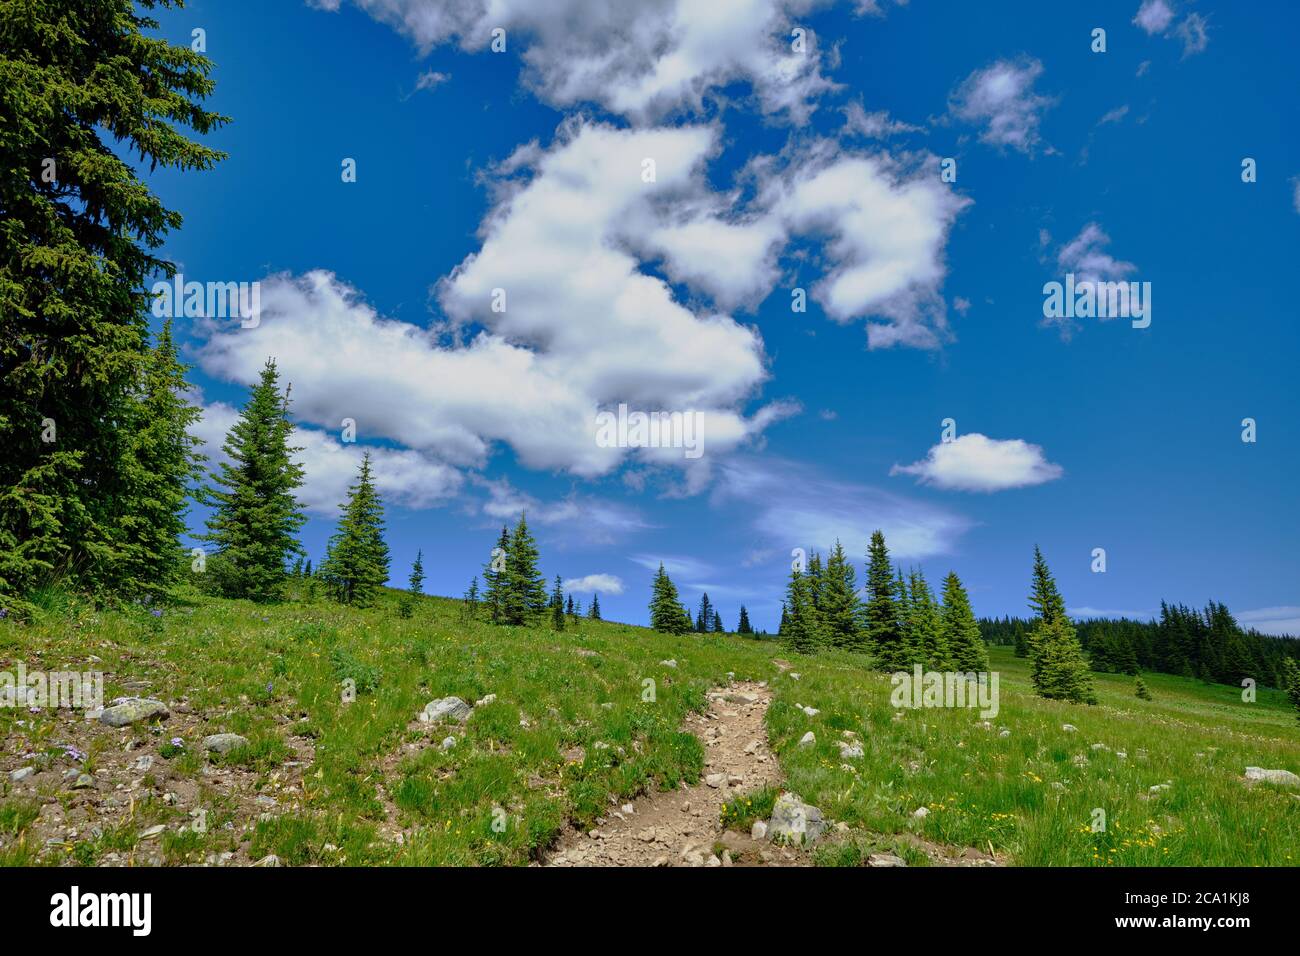 The Great Outdoors. Worn footpath through green alpine meadows sprinkled with yellow flowers and conifers under blue sky and white fluffy clouds. Stock Photo